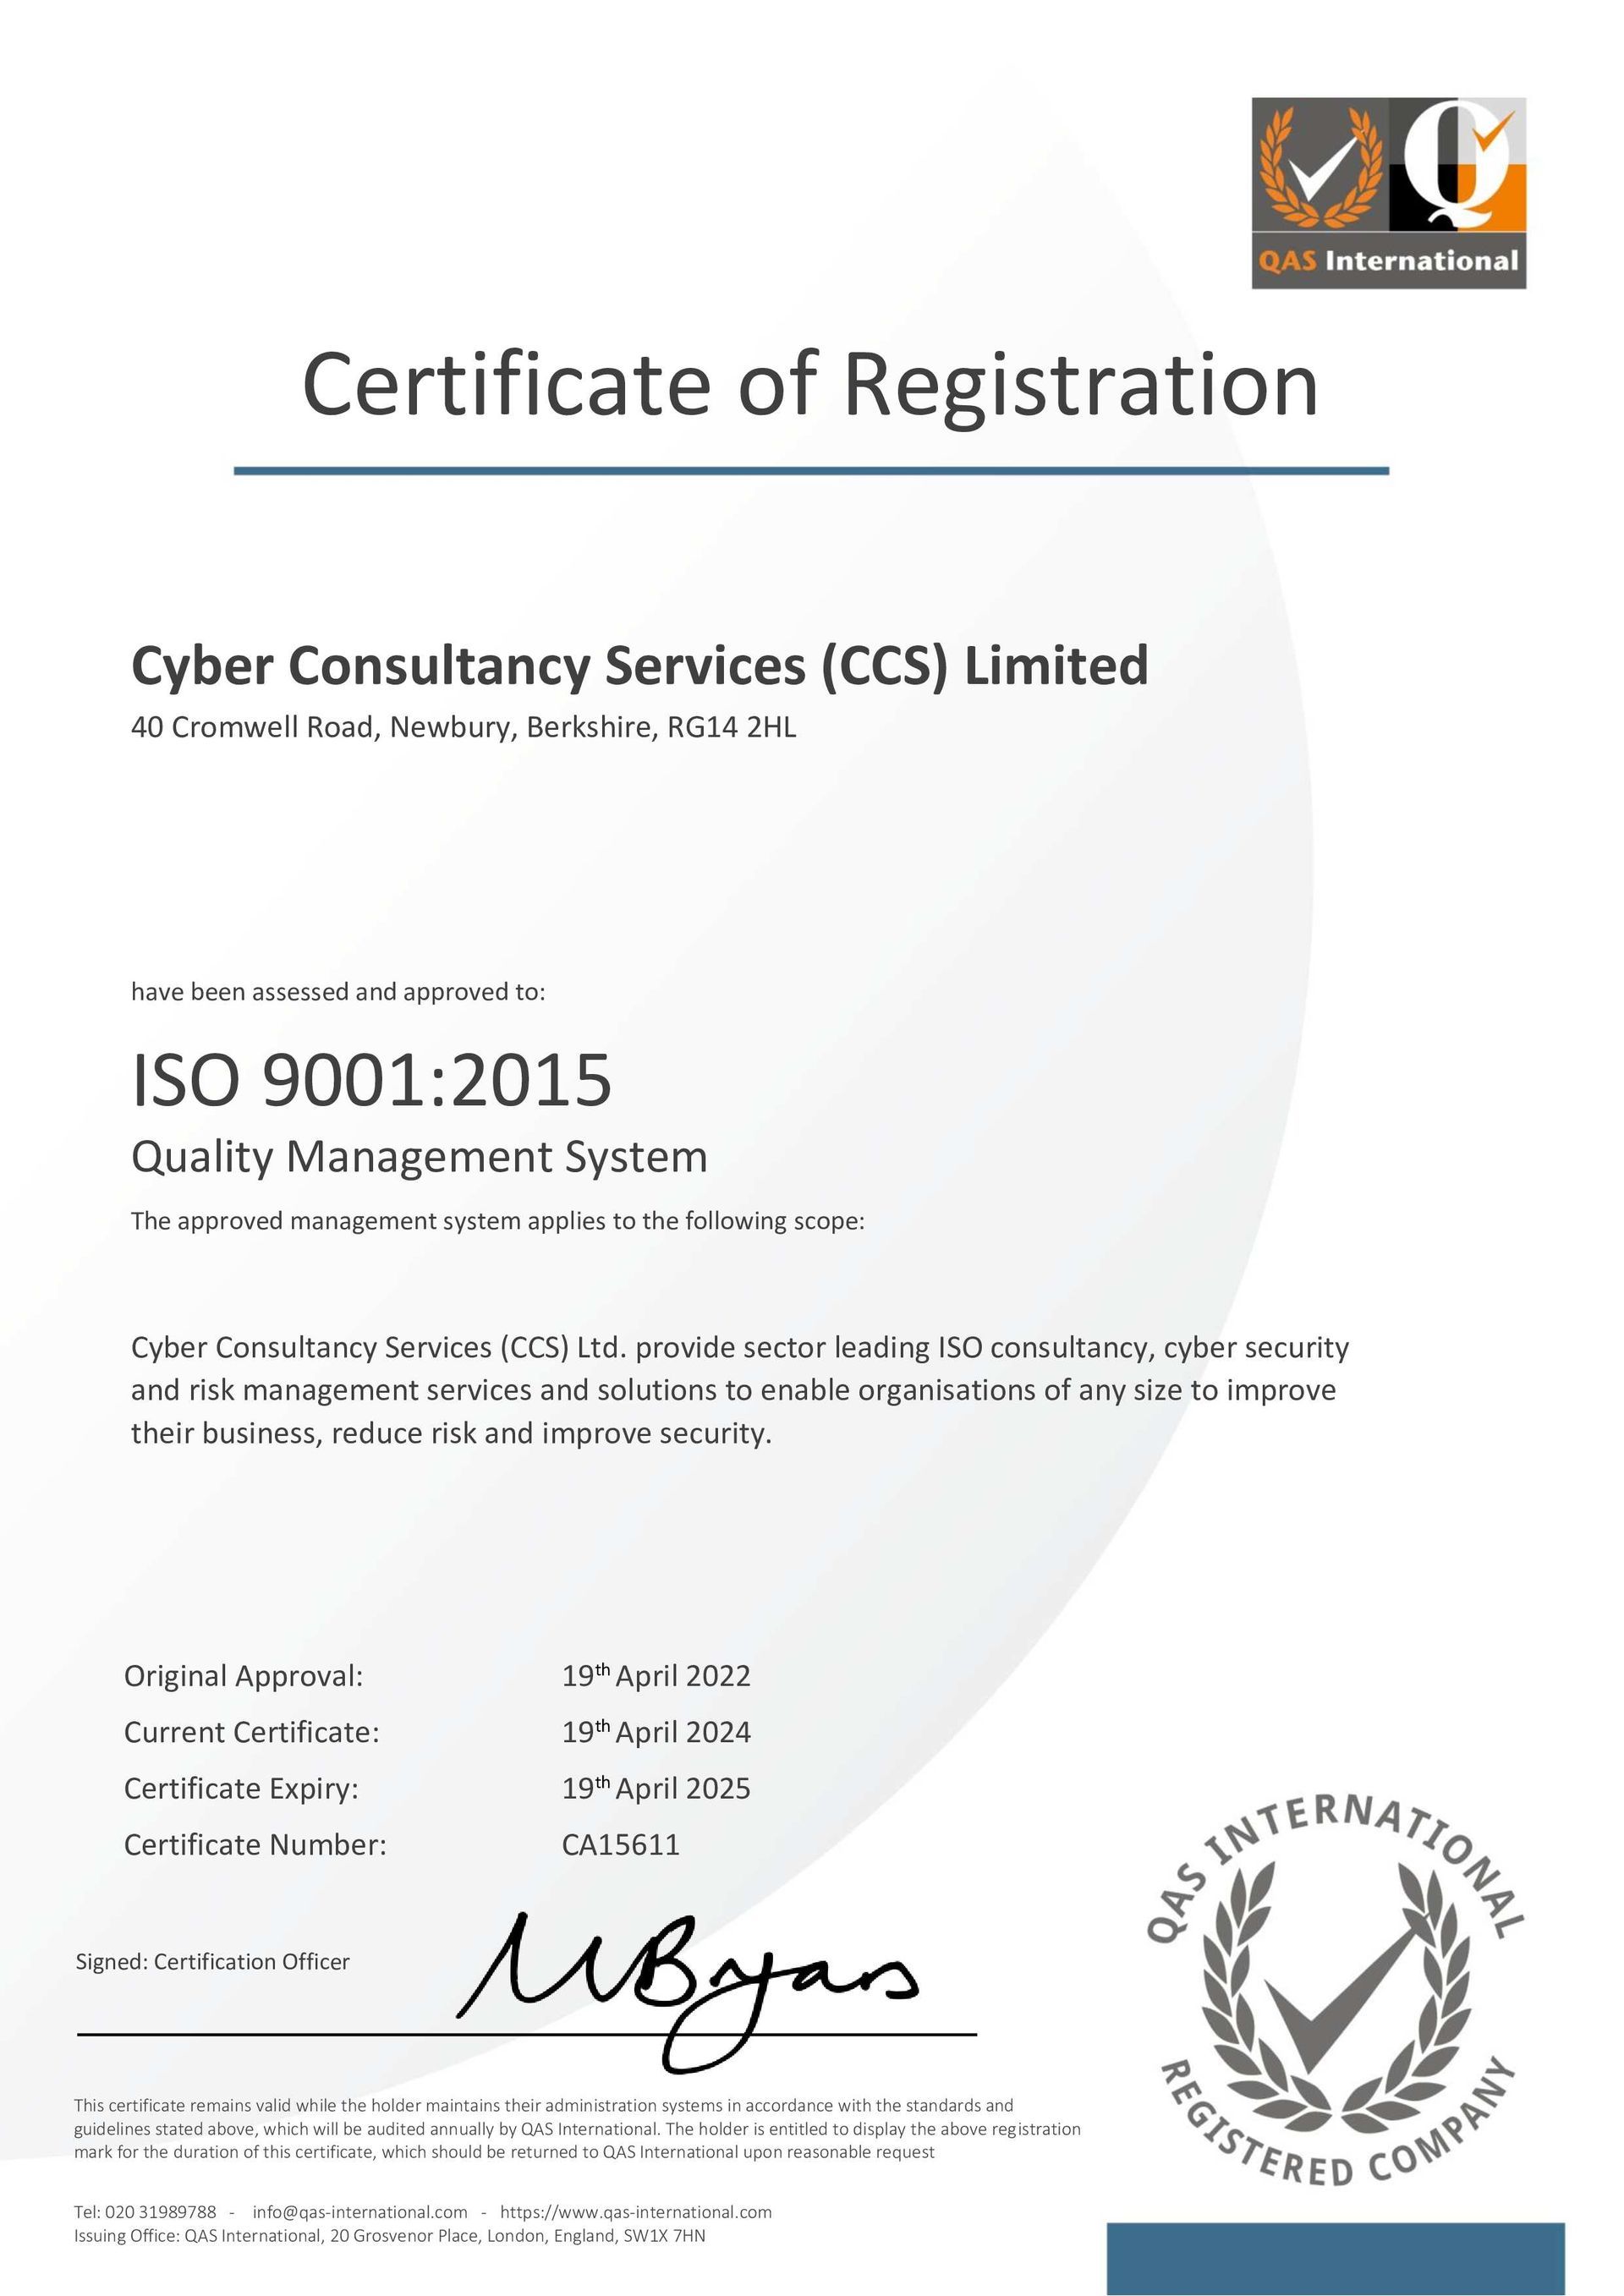 CCS are an ISO 9001 Certified Business